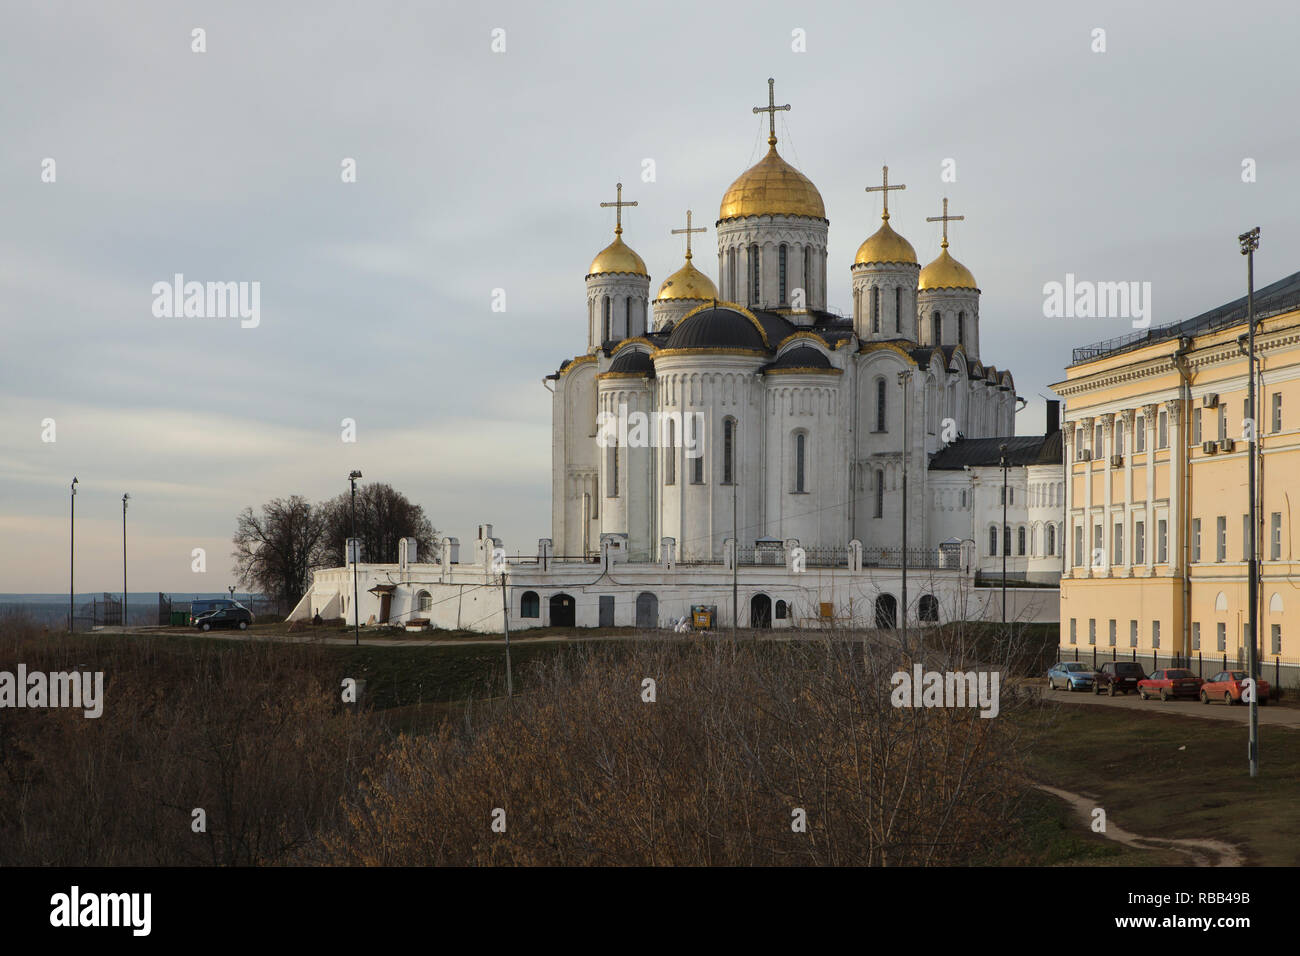 Dormition Cathedral in Vladimir, Russia. The yellow building at the right is the former building of the local government office (prisutstvennoye mesto), now housing the picture gallery of the Vladimir-Suzdal Museum. Stock Photo